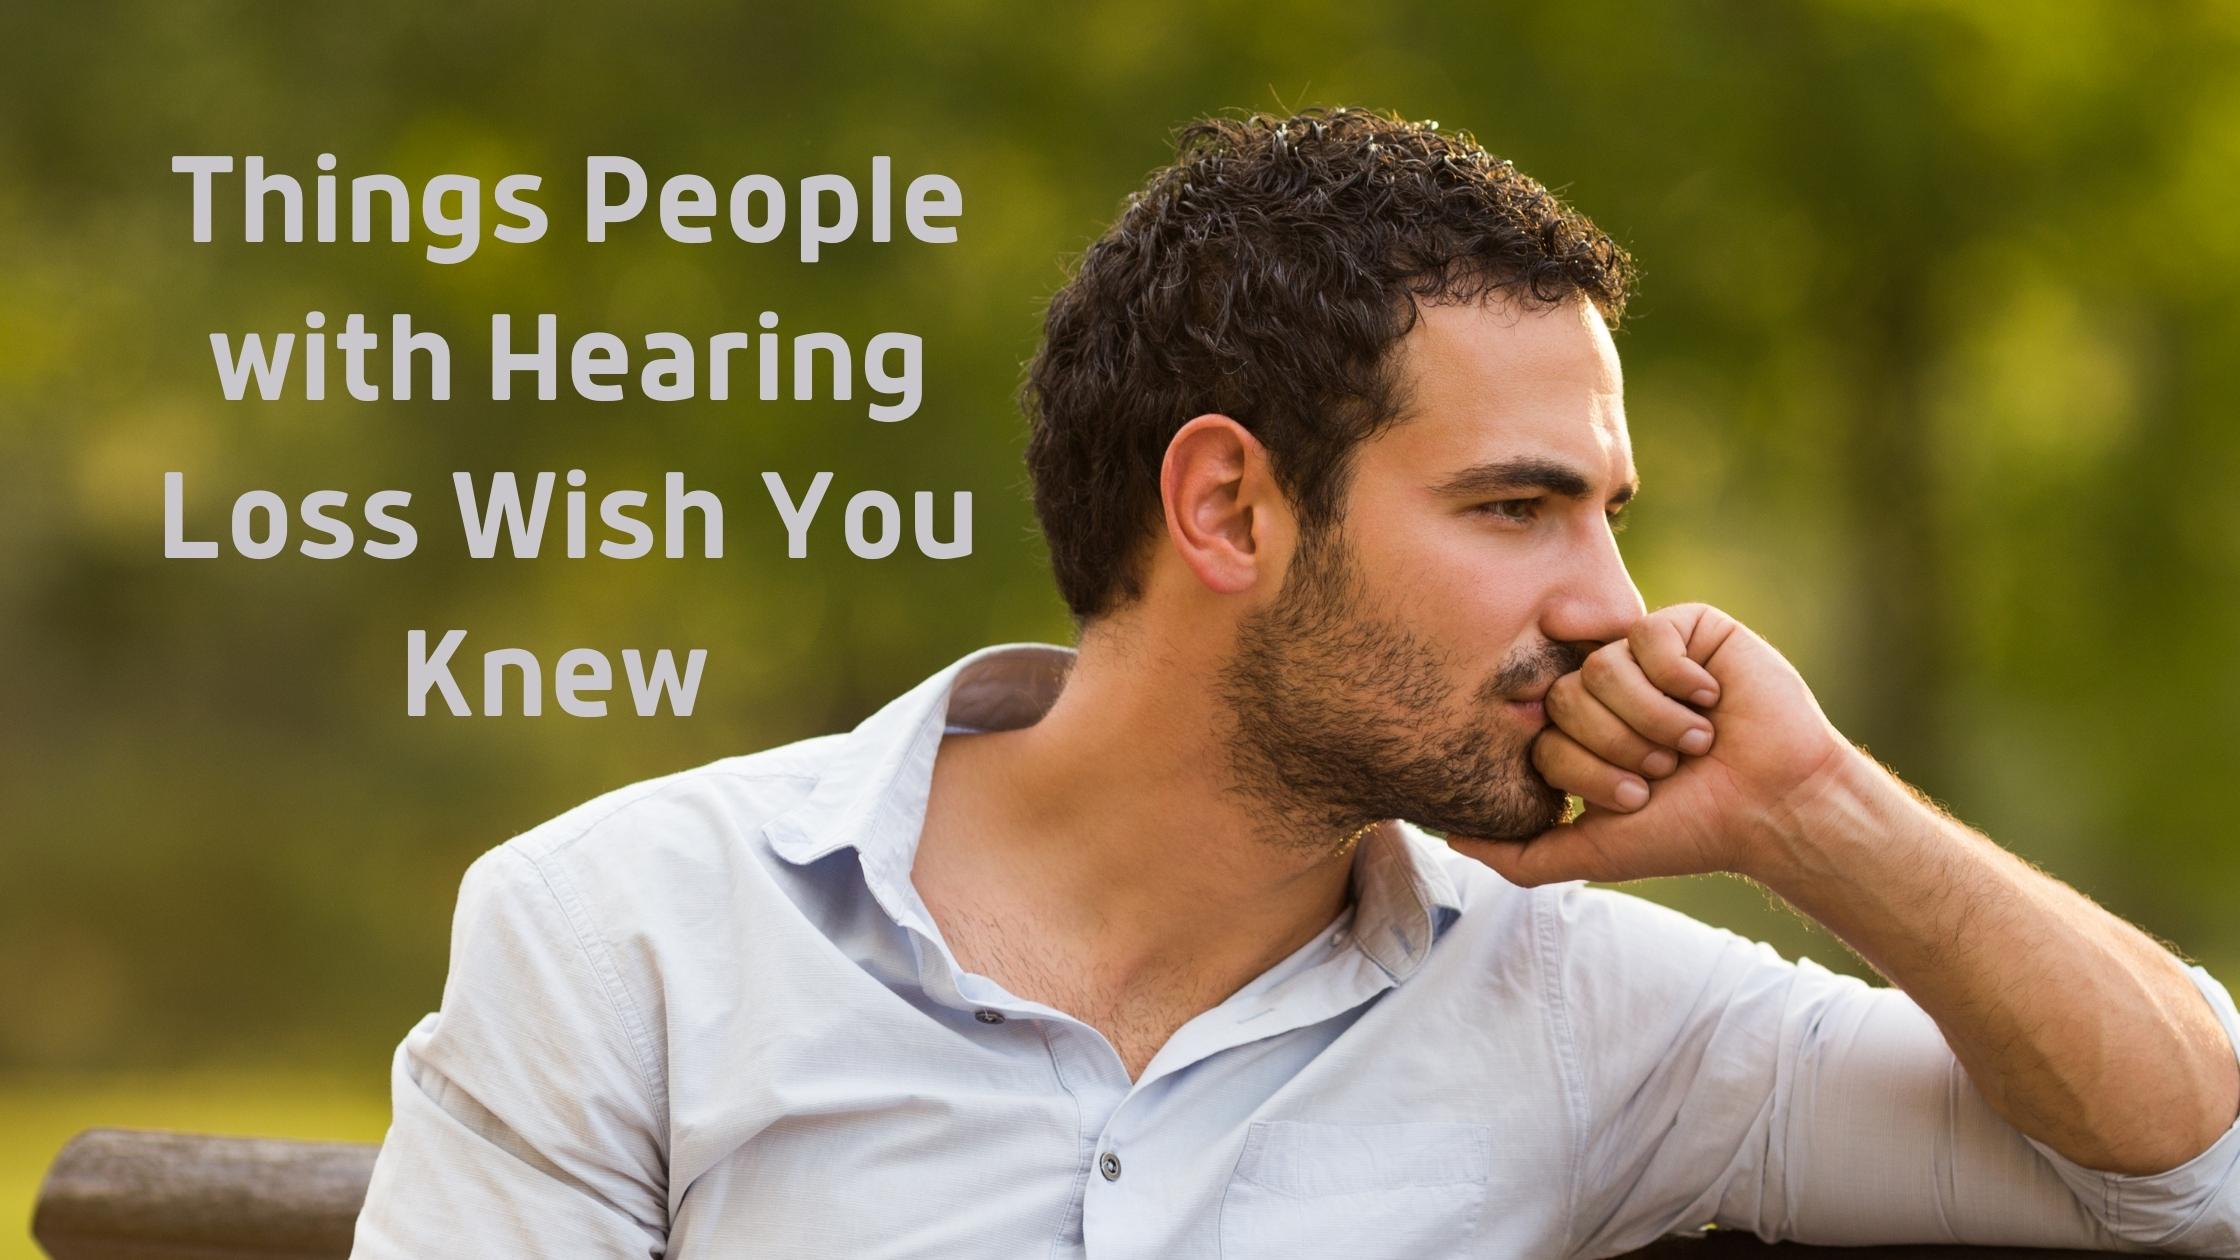 Featured image for “Things People with Hearing Loss Wish You Knew”